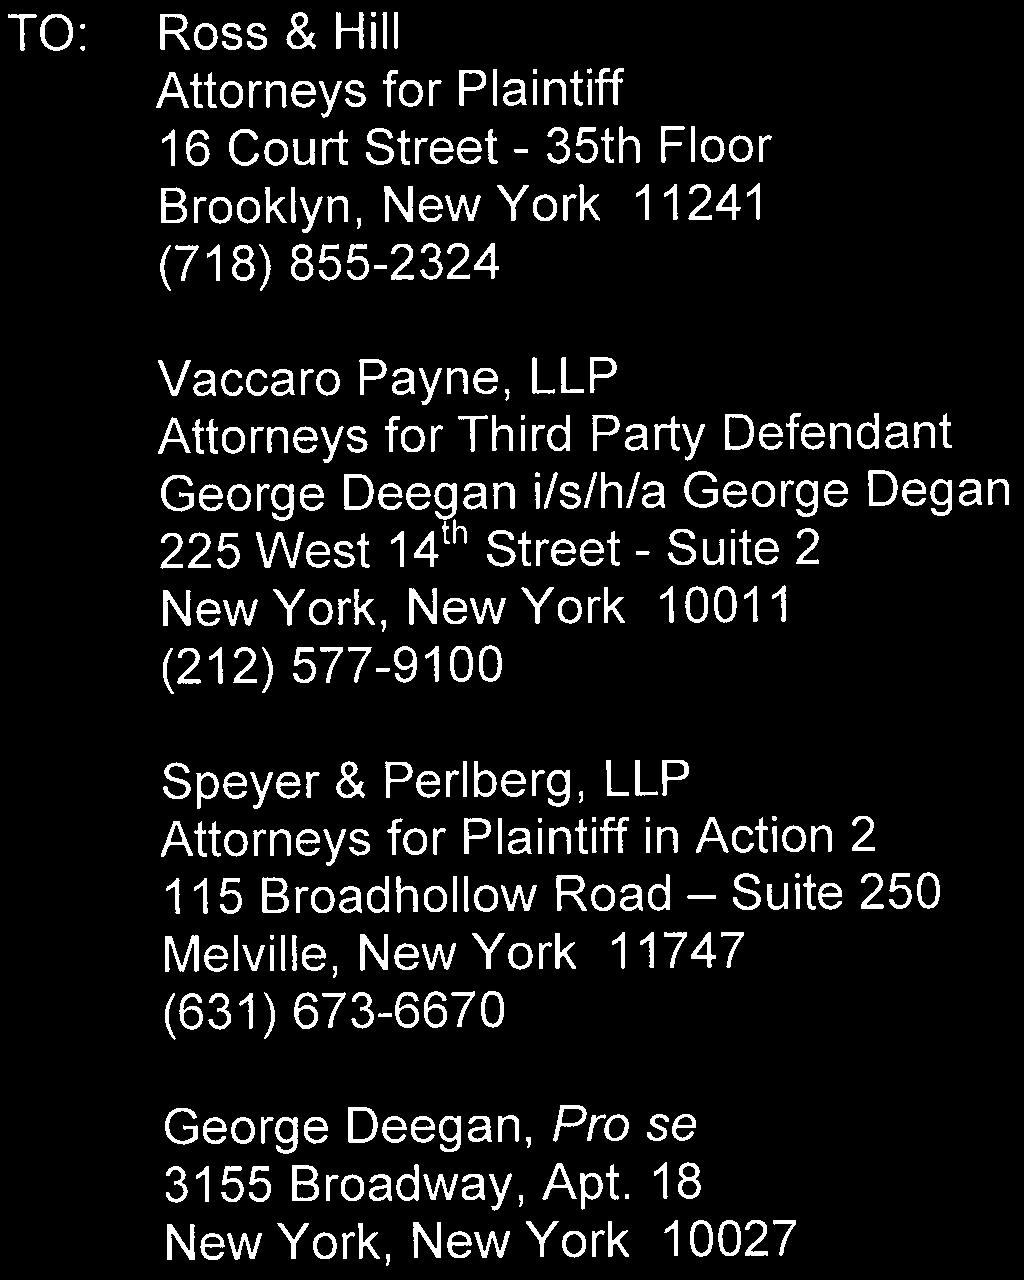 TO: Ross & Hill Attorneys for Plaintiff 16 Court Street - 35th Floor Brooklyn, New York 11241 (718) 855-2324 Vaccaro Payne, LLP Attorneys for Third Party Defendant George Deegan i/s/h/a George Degan